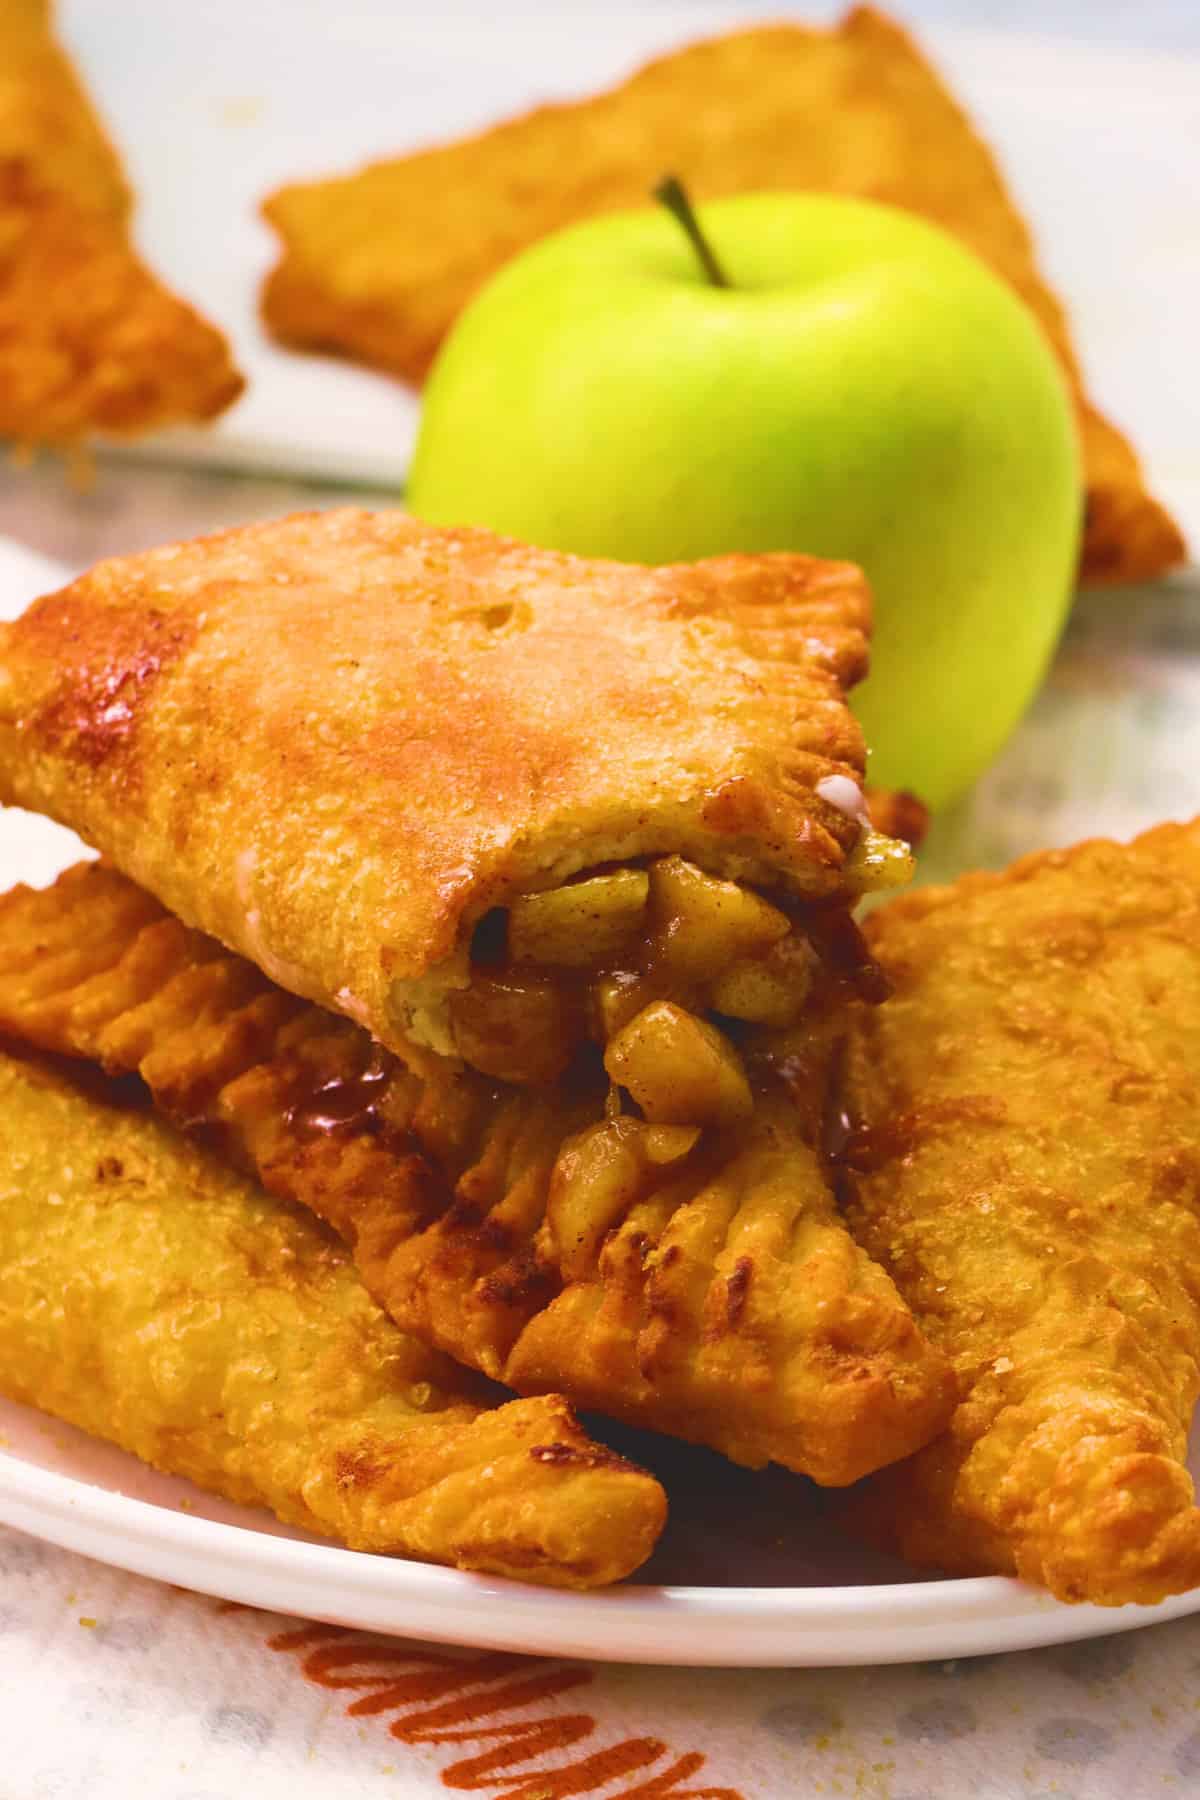 Sinfully delicious fried apple pie